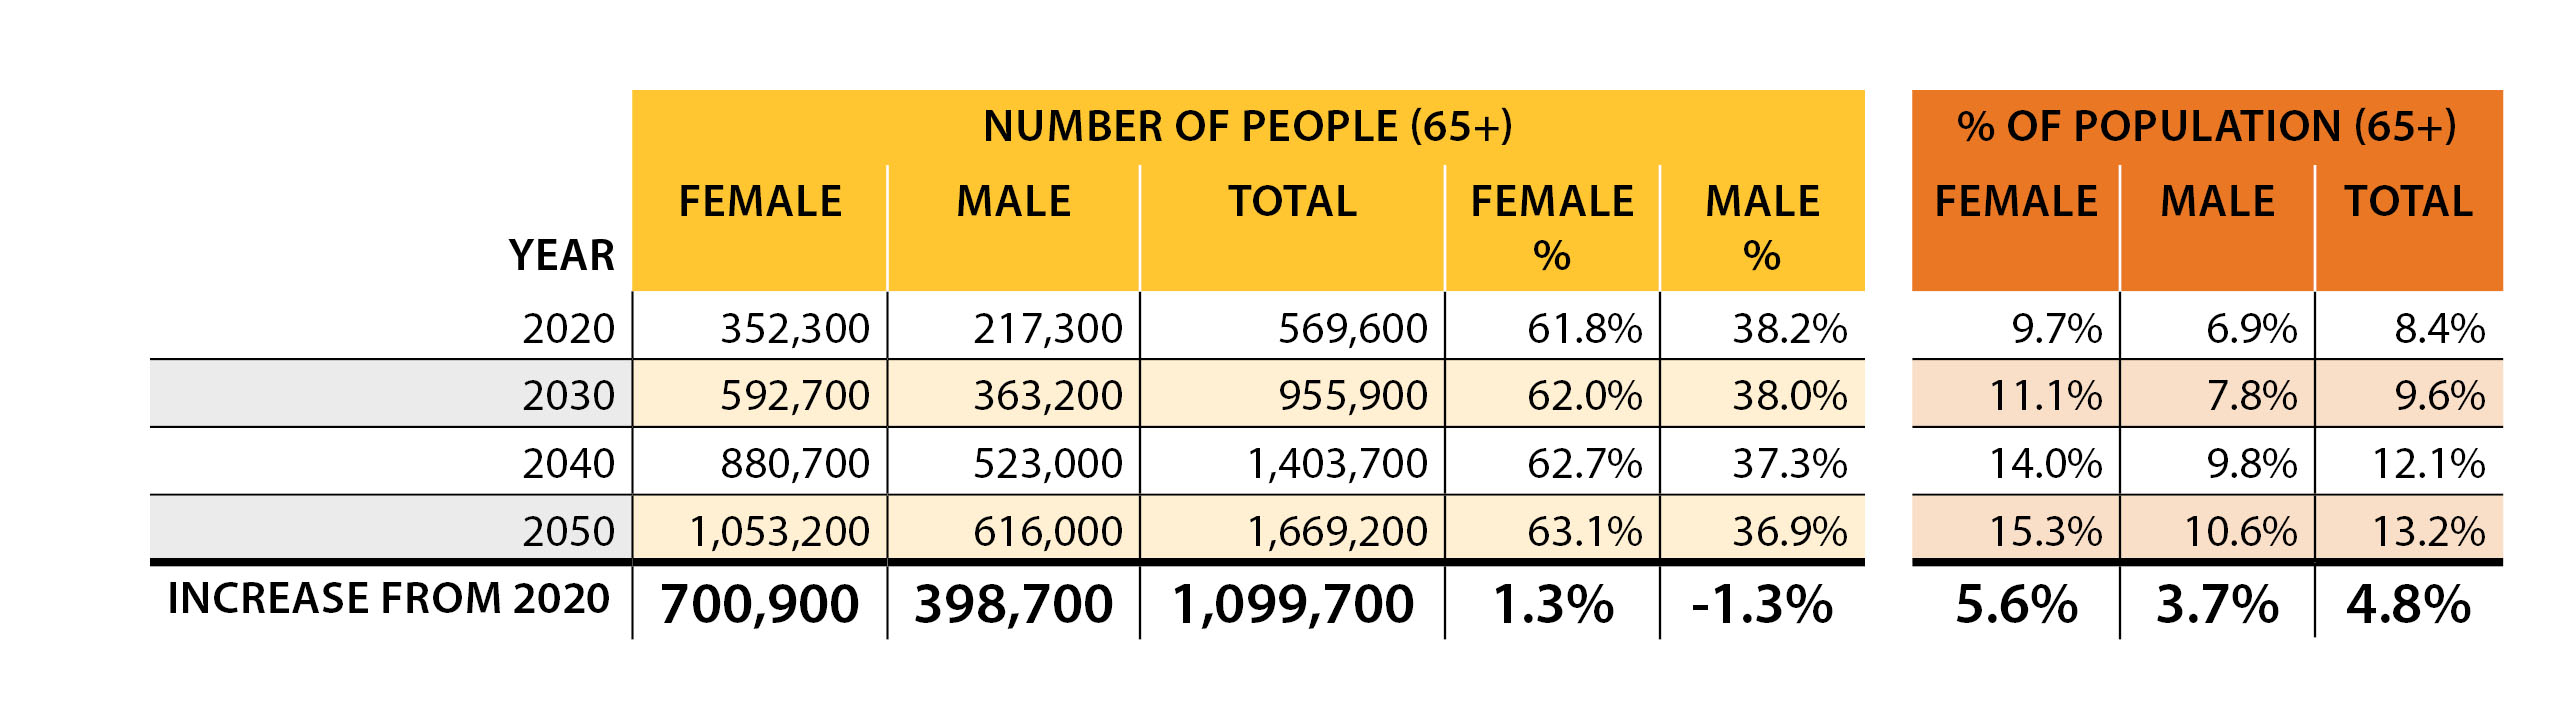 Estimates of the number of people aged 65+ in Canada with dementia by sex, 2020 and 2050